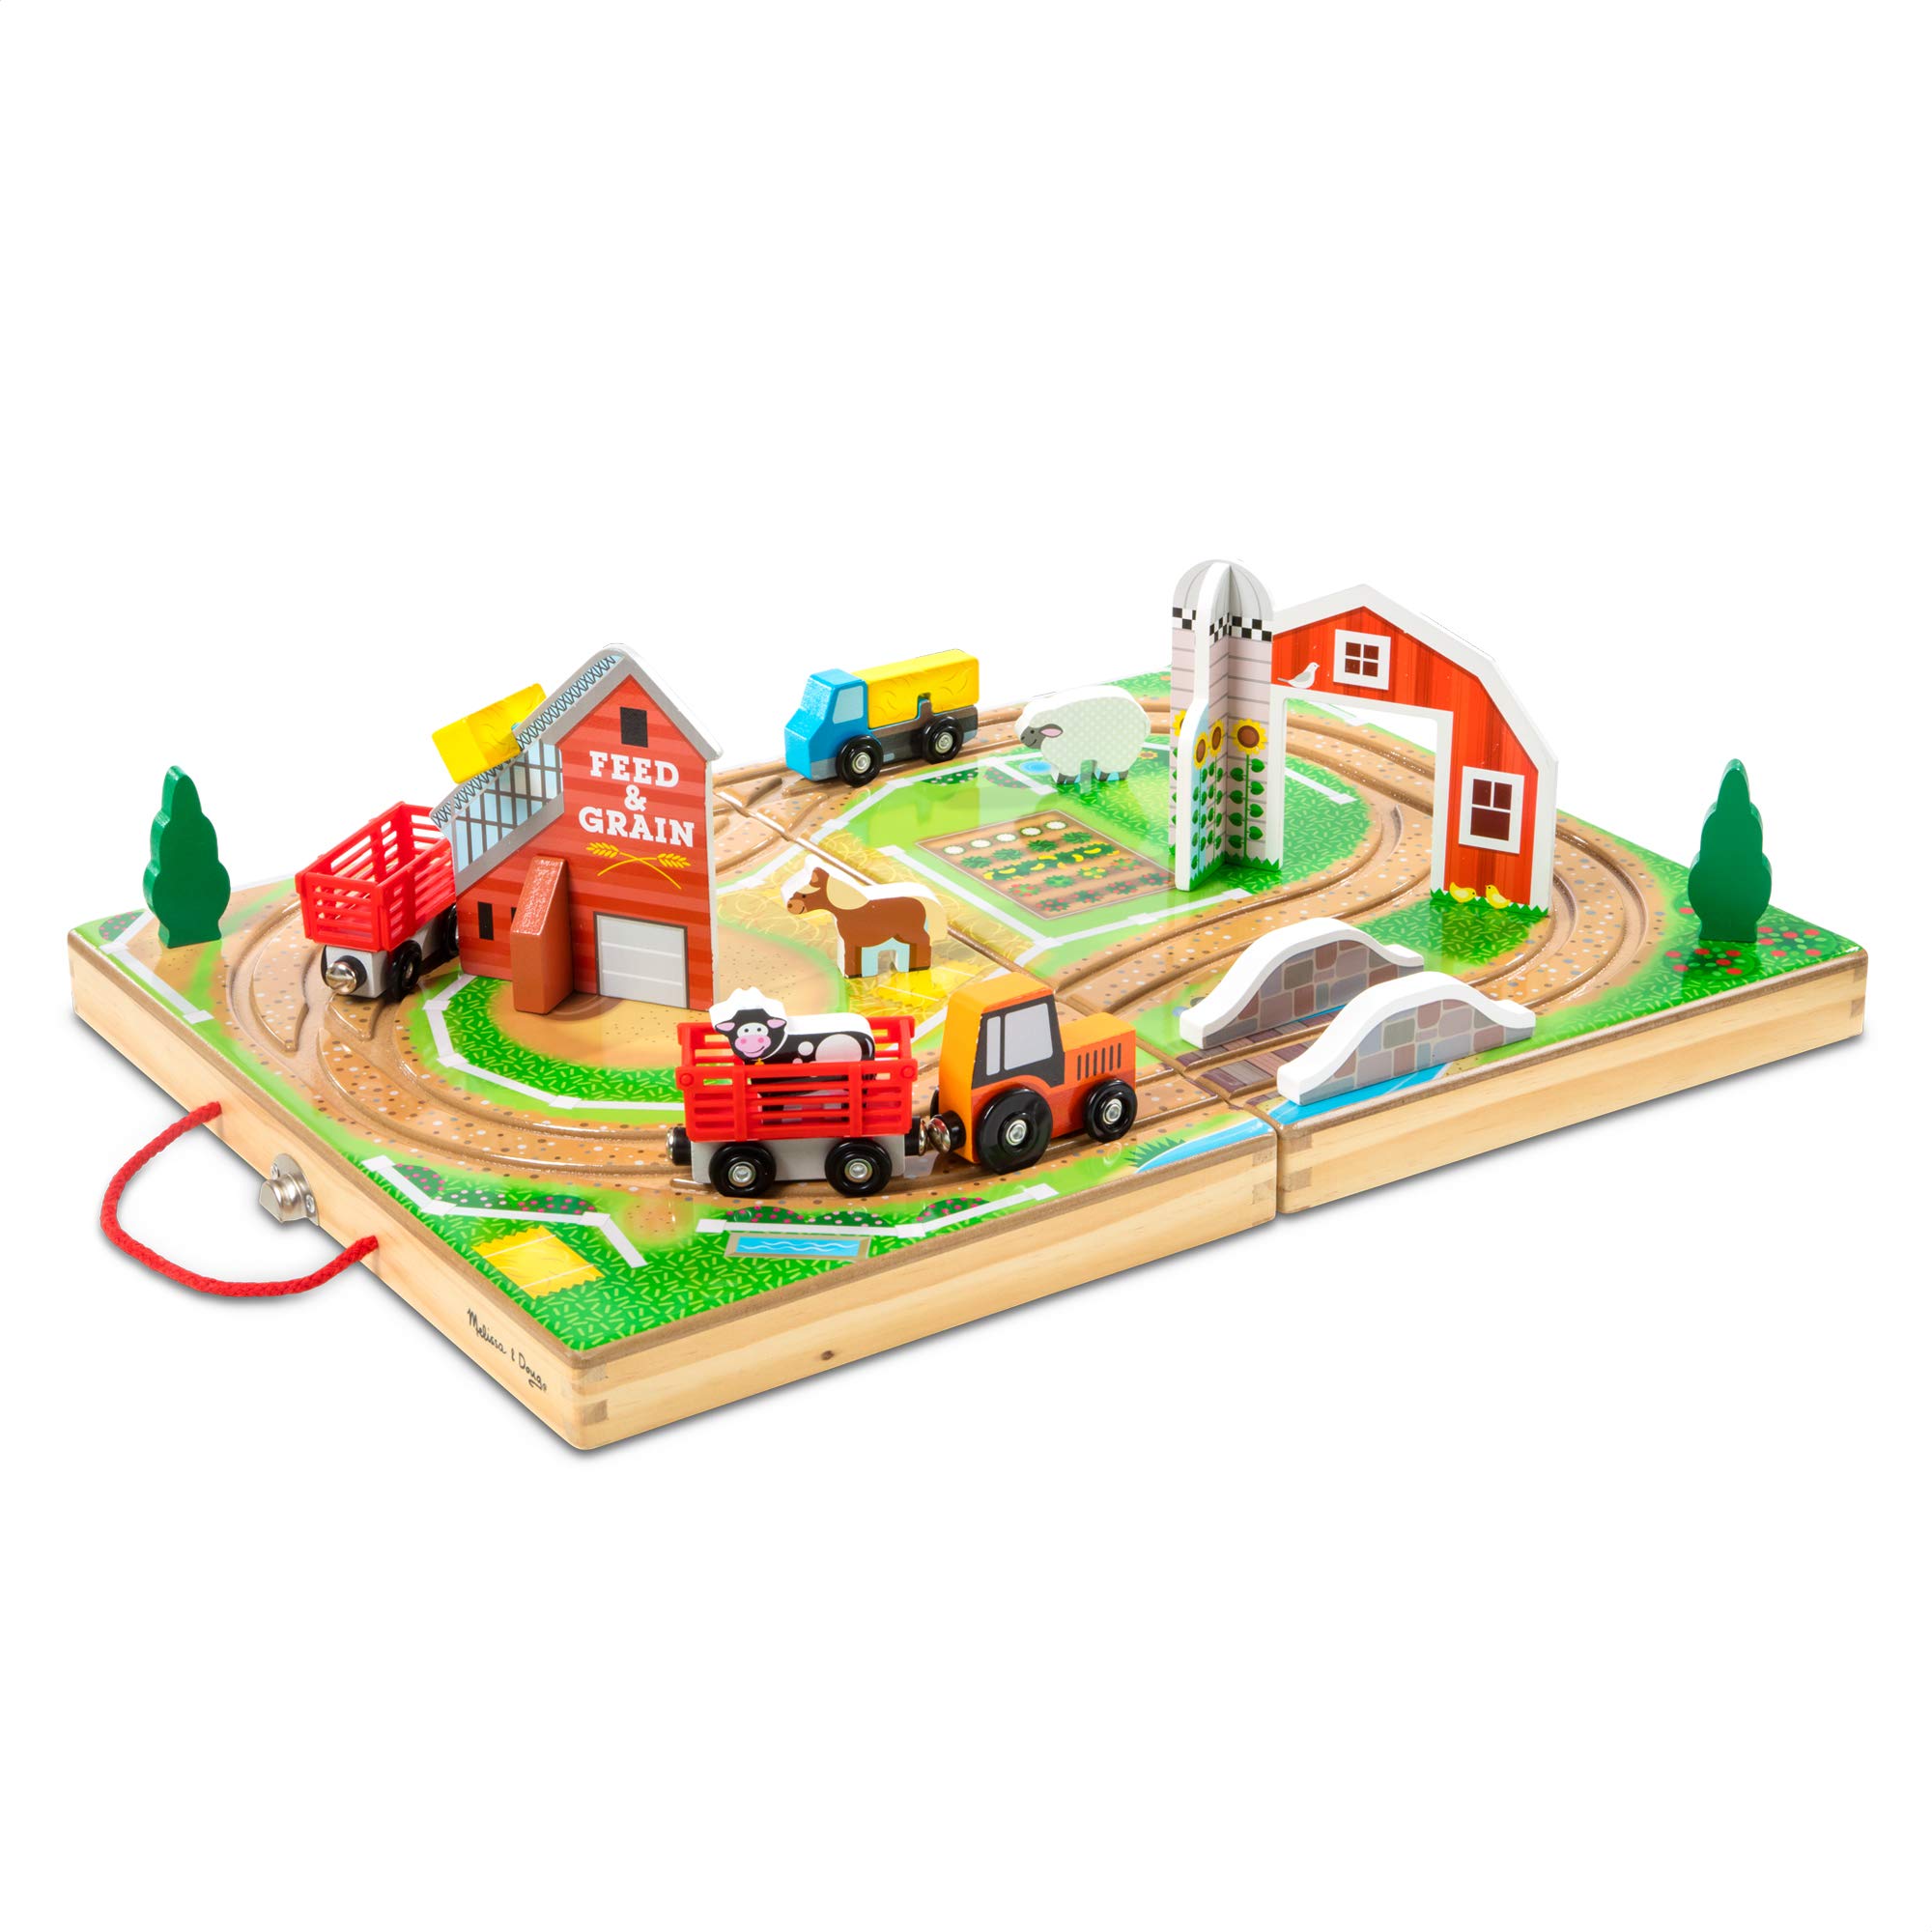 Melissa & Doug 17-Piece Wooden Take-Along Tabletop Farm, 4 Farm Vehicles, Play Pieces, Barn, Grain House - Take-Along Pretend Play Toy Barn Farm Toys For Toddlers Ages 1+